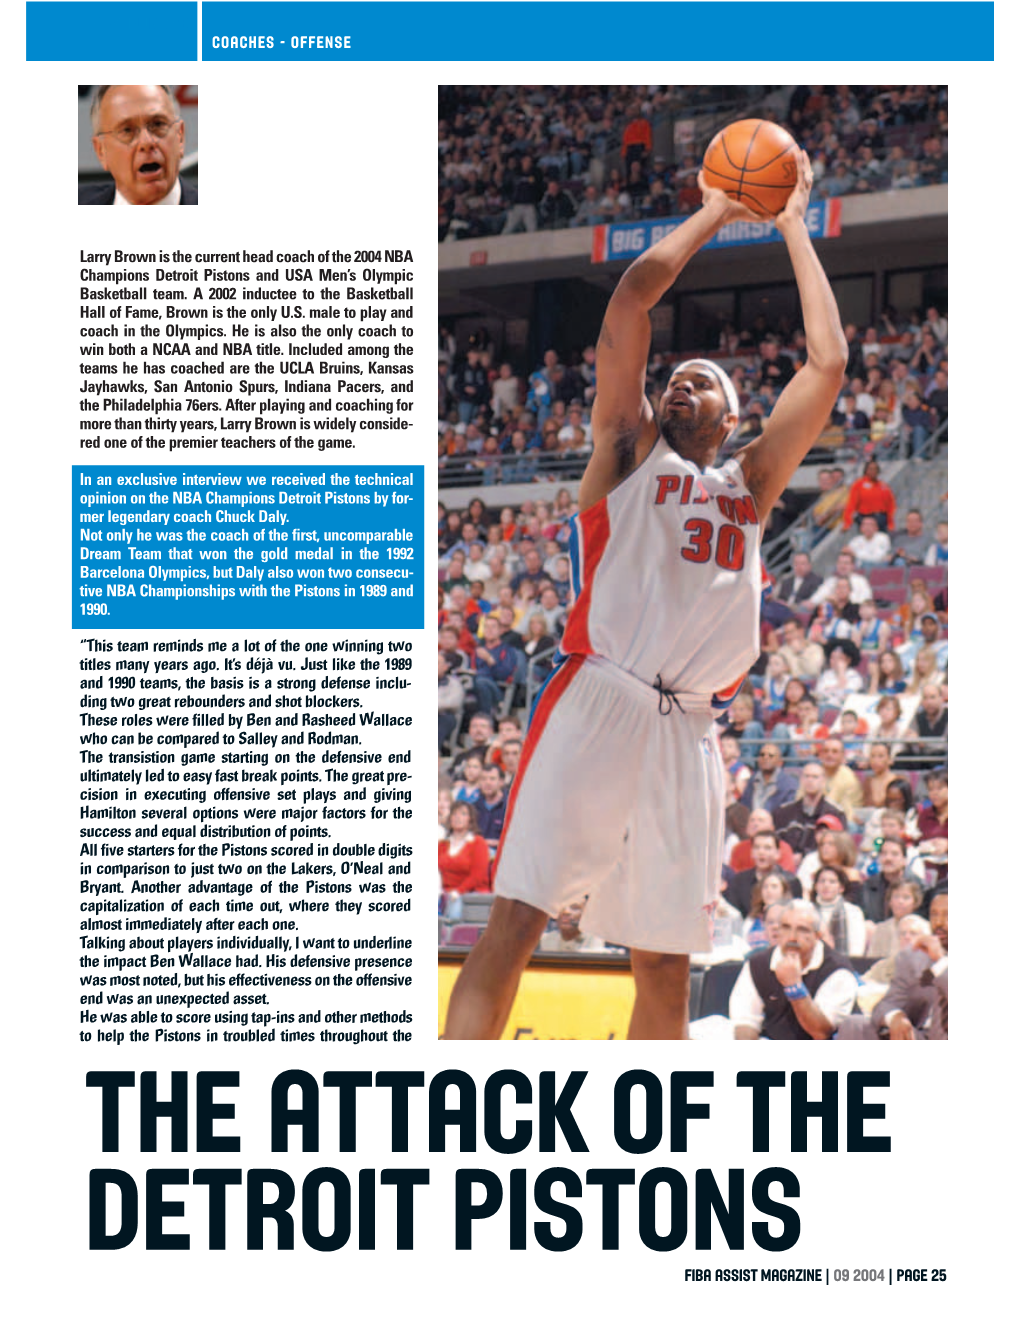 THE ATTACK of the Detroit Pistons